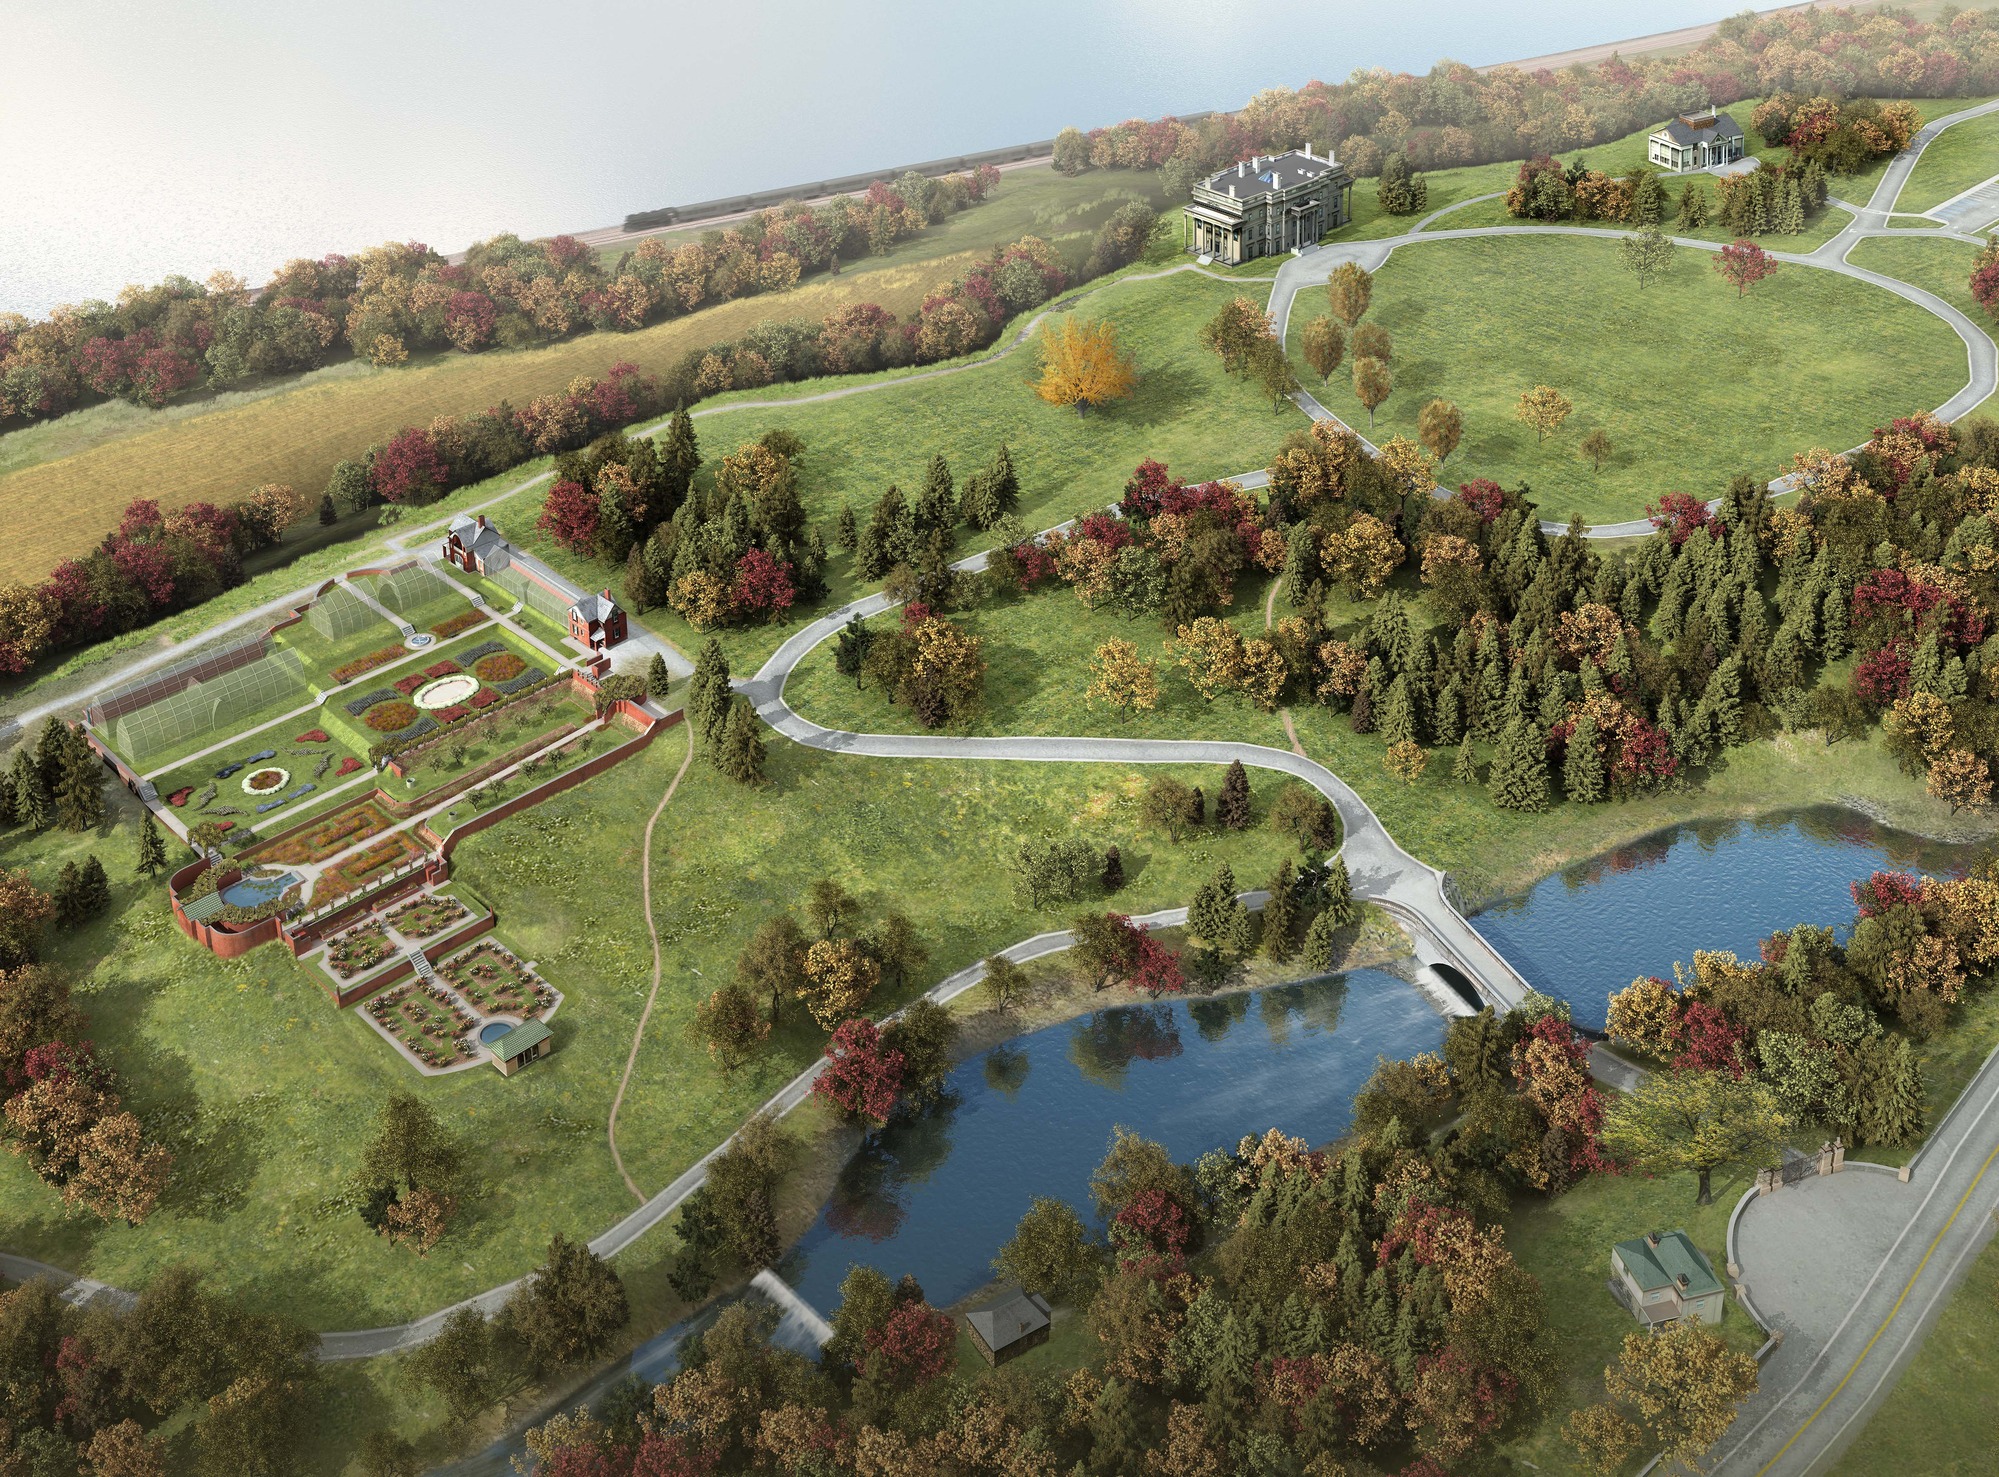 An artist's rendering of the park, nestled between the Hudson River and Route 9. Roadways, paths, a pond, buildings, and gardens are among mowed lawns. An accessible version of the brochure is available on the park website.